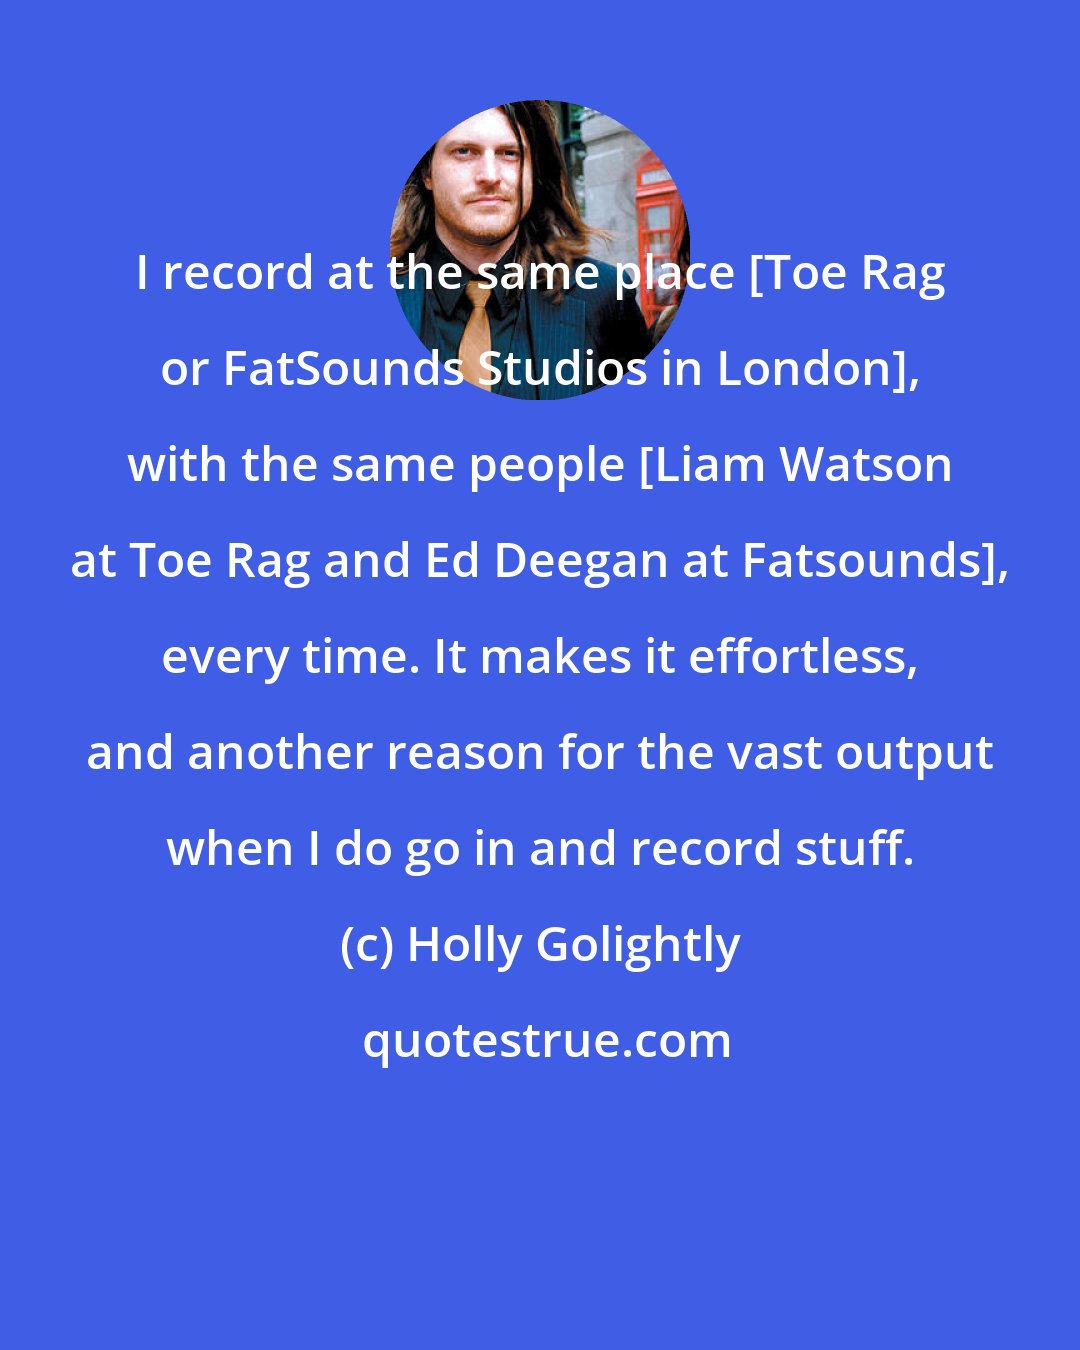 Holly Golightly: I record at the same place [Toe Rag or FatSounds Studios in London], with the same people [Liam Watson at Toe Rag and Ed Deegan at Fatsounds], every time. It makes it effortless, and another reason for the vast output when I do go in and record stuff.